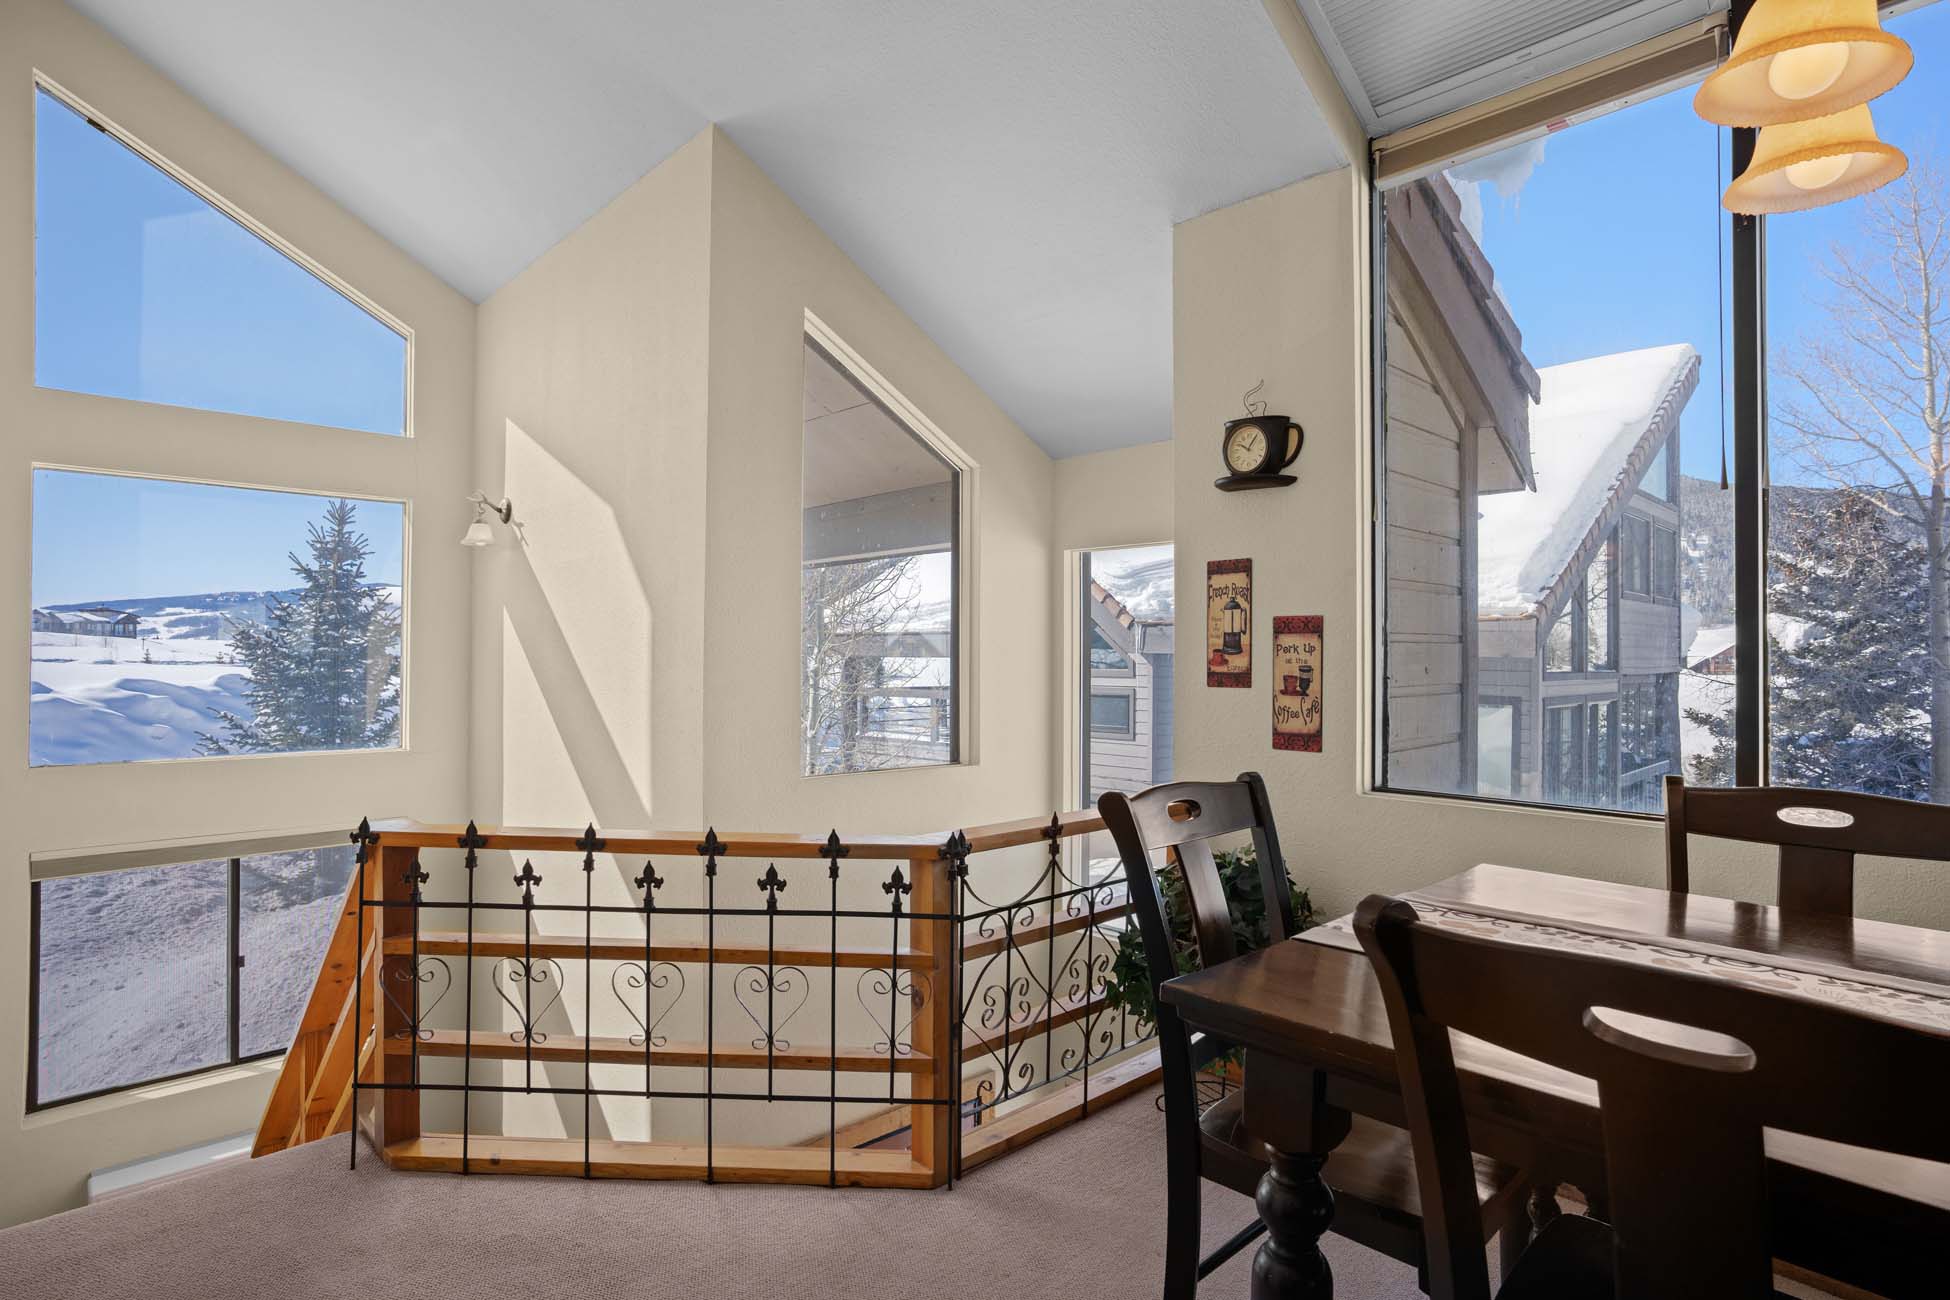 49 Powderview Drive, Crested Butte Colorado - views from interior